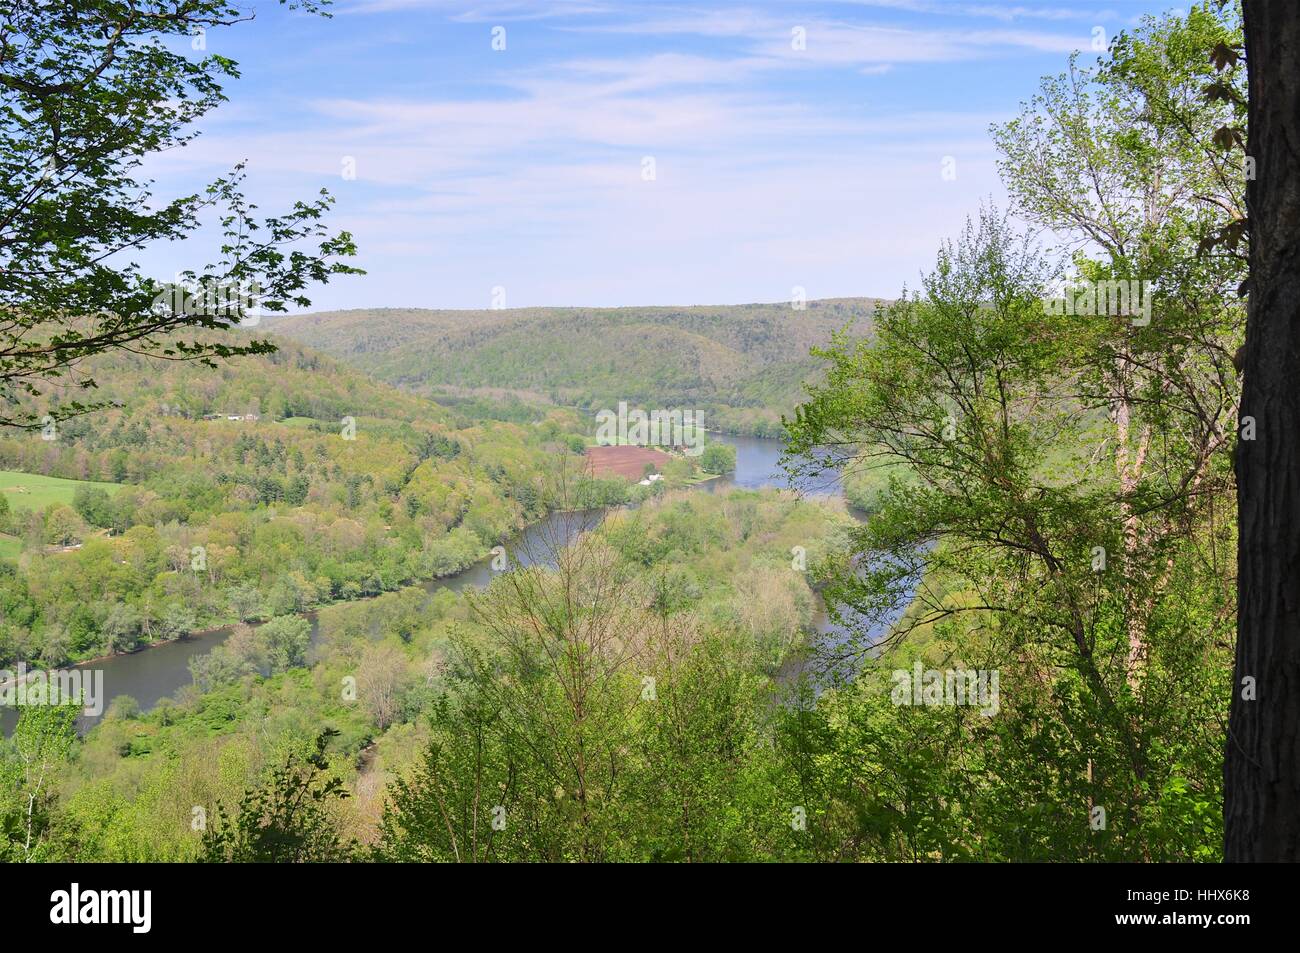 Allegheny River, Allegheny National Forest, Pennsylvania Foto Stock